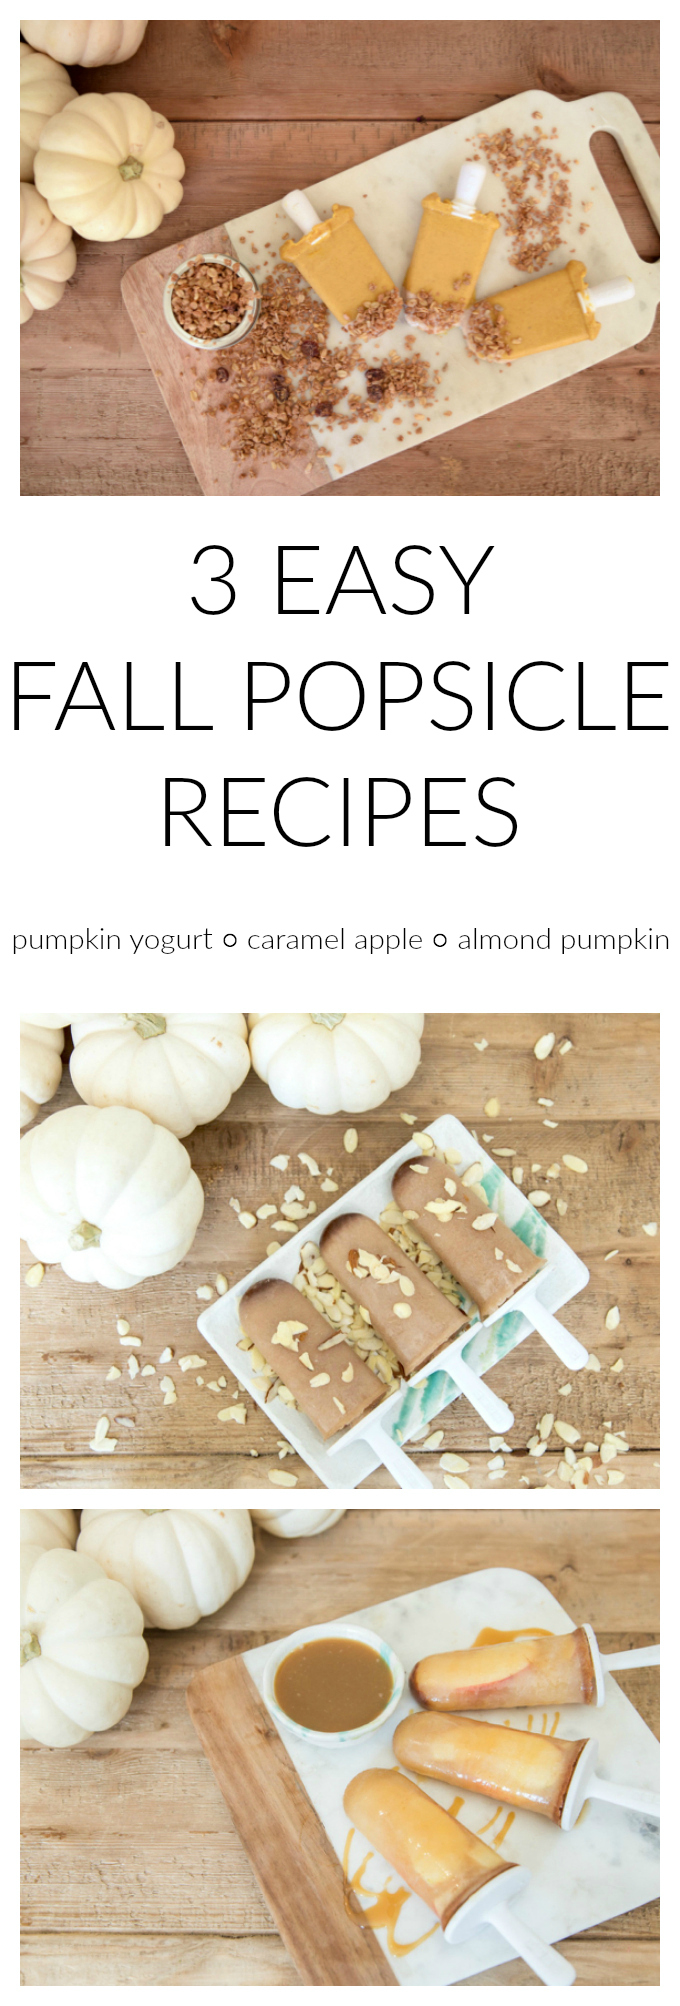 how to make three easy fall popsicle recipes